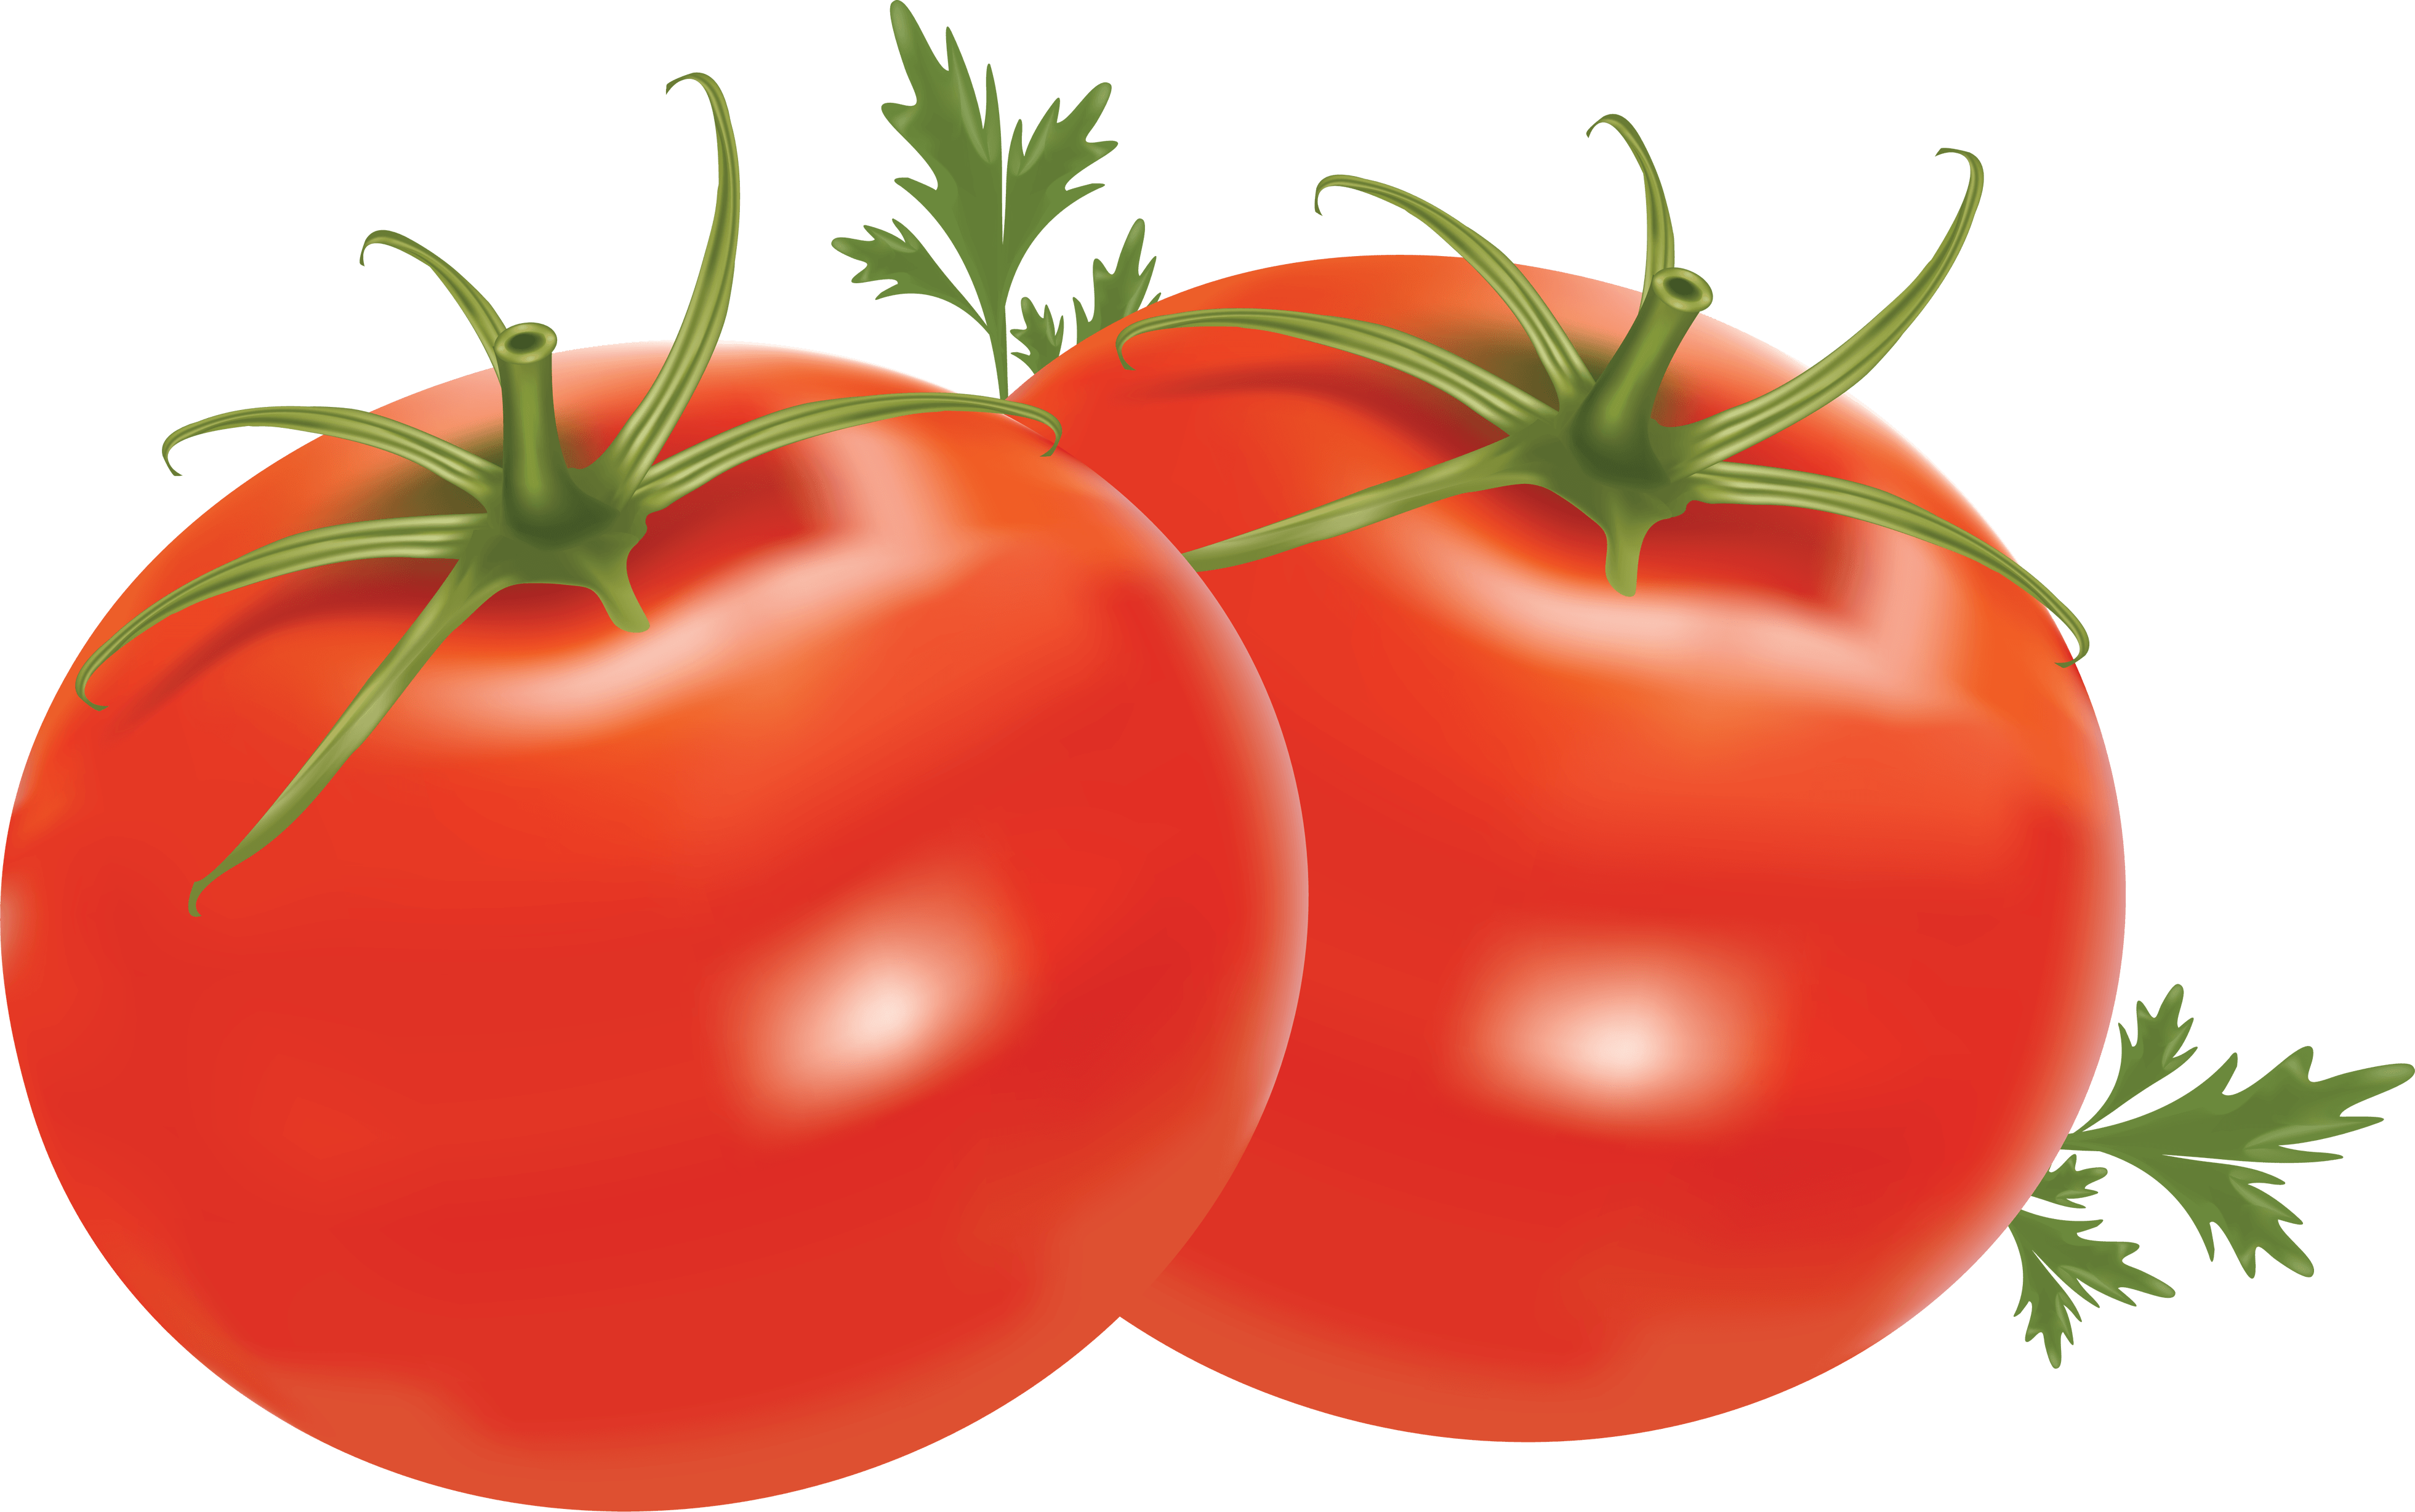 Tomato PNG HD Transparent Tomato HD PNG Image